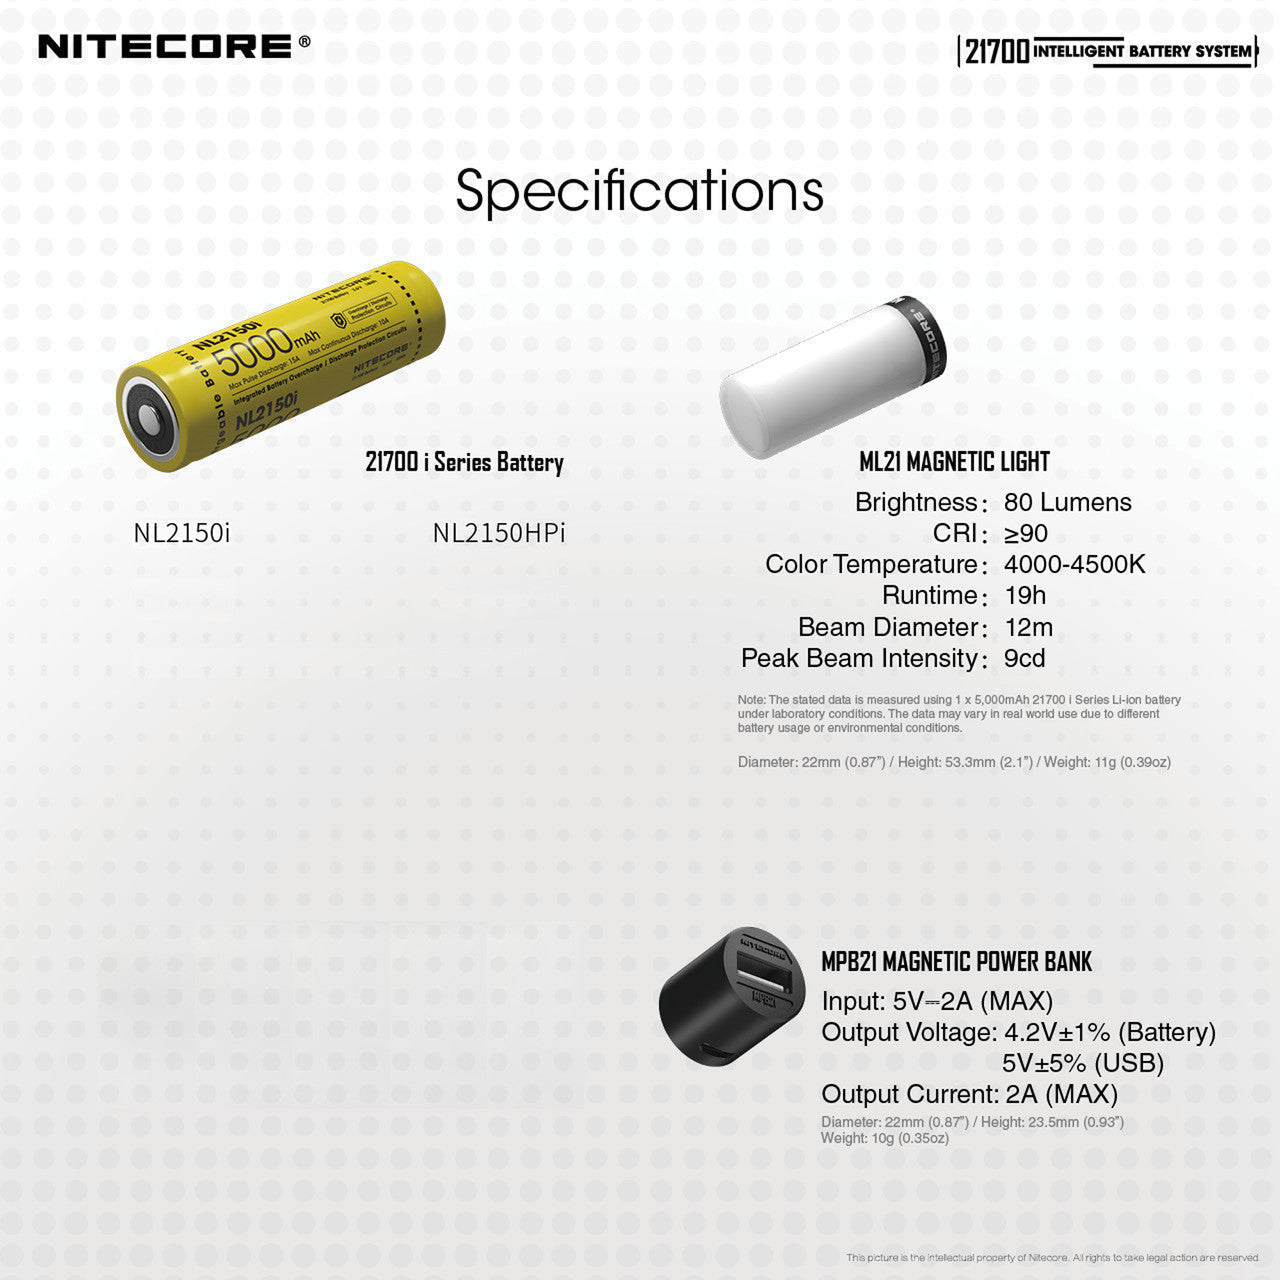 Flashlights & Headlamps - Nitecore Intelligent 21700 Battery System With Lantern And Charger (80 Lumens | Rechargeable)